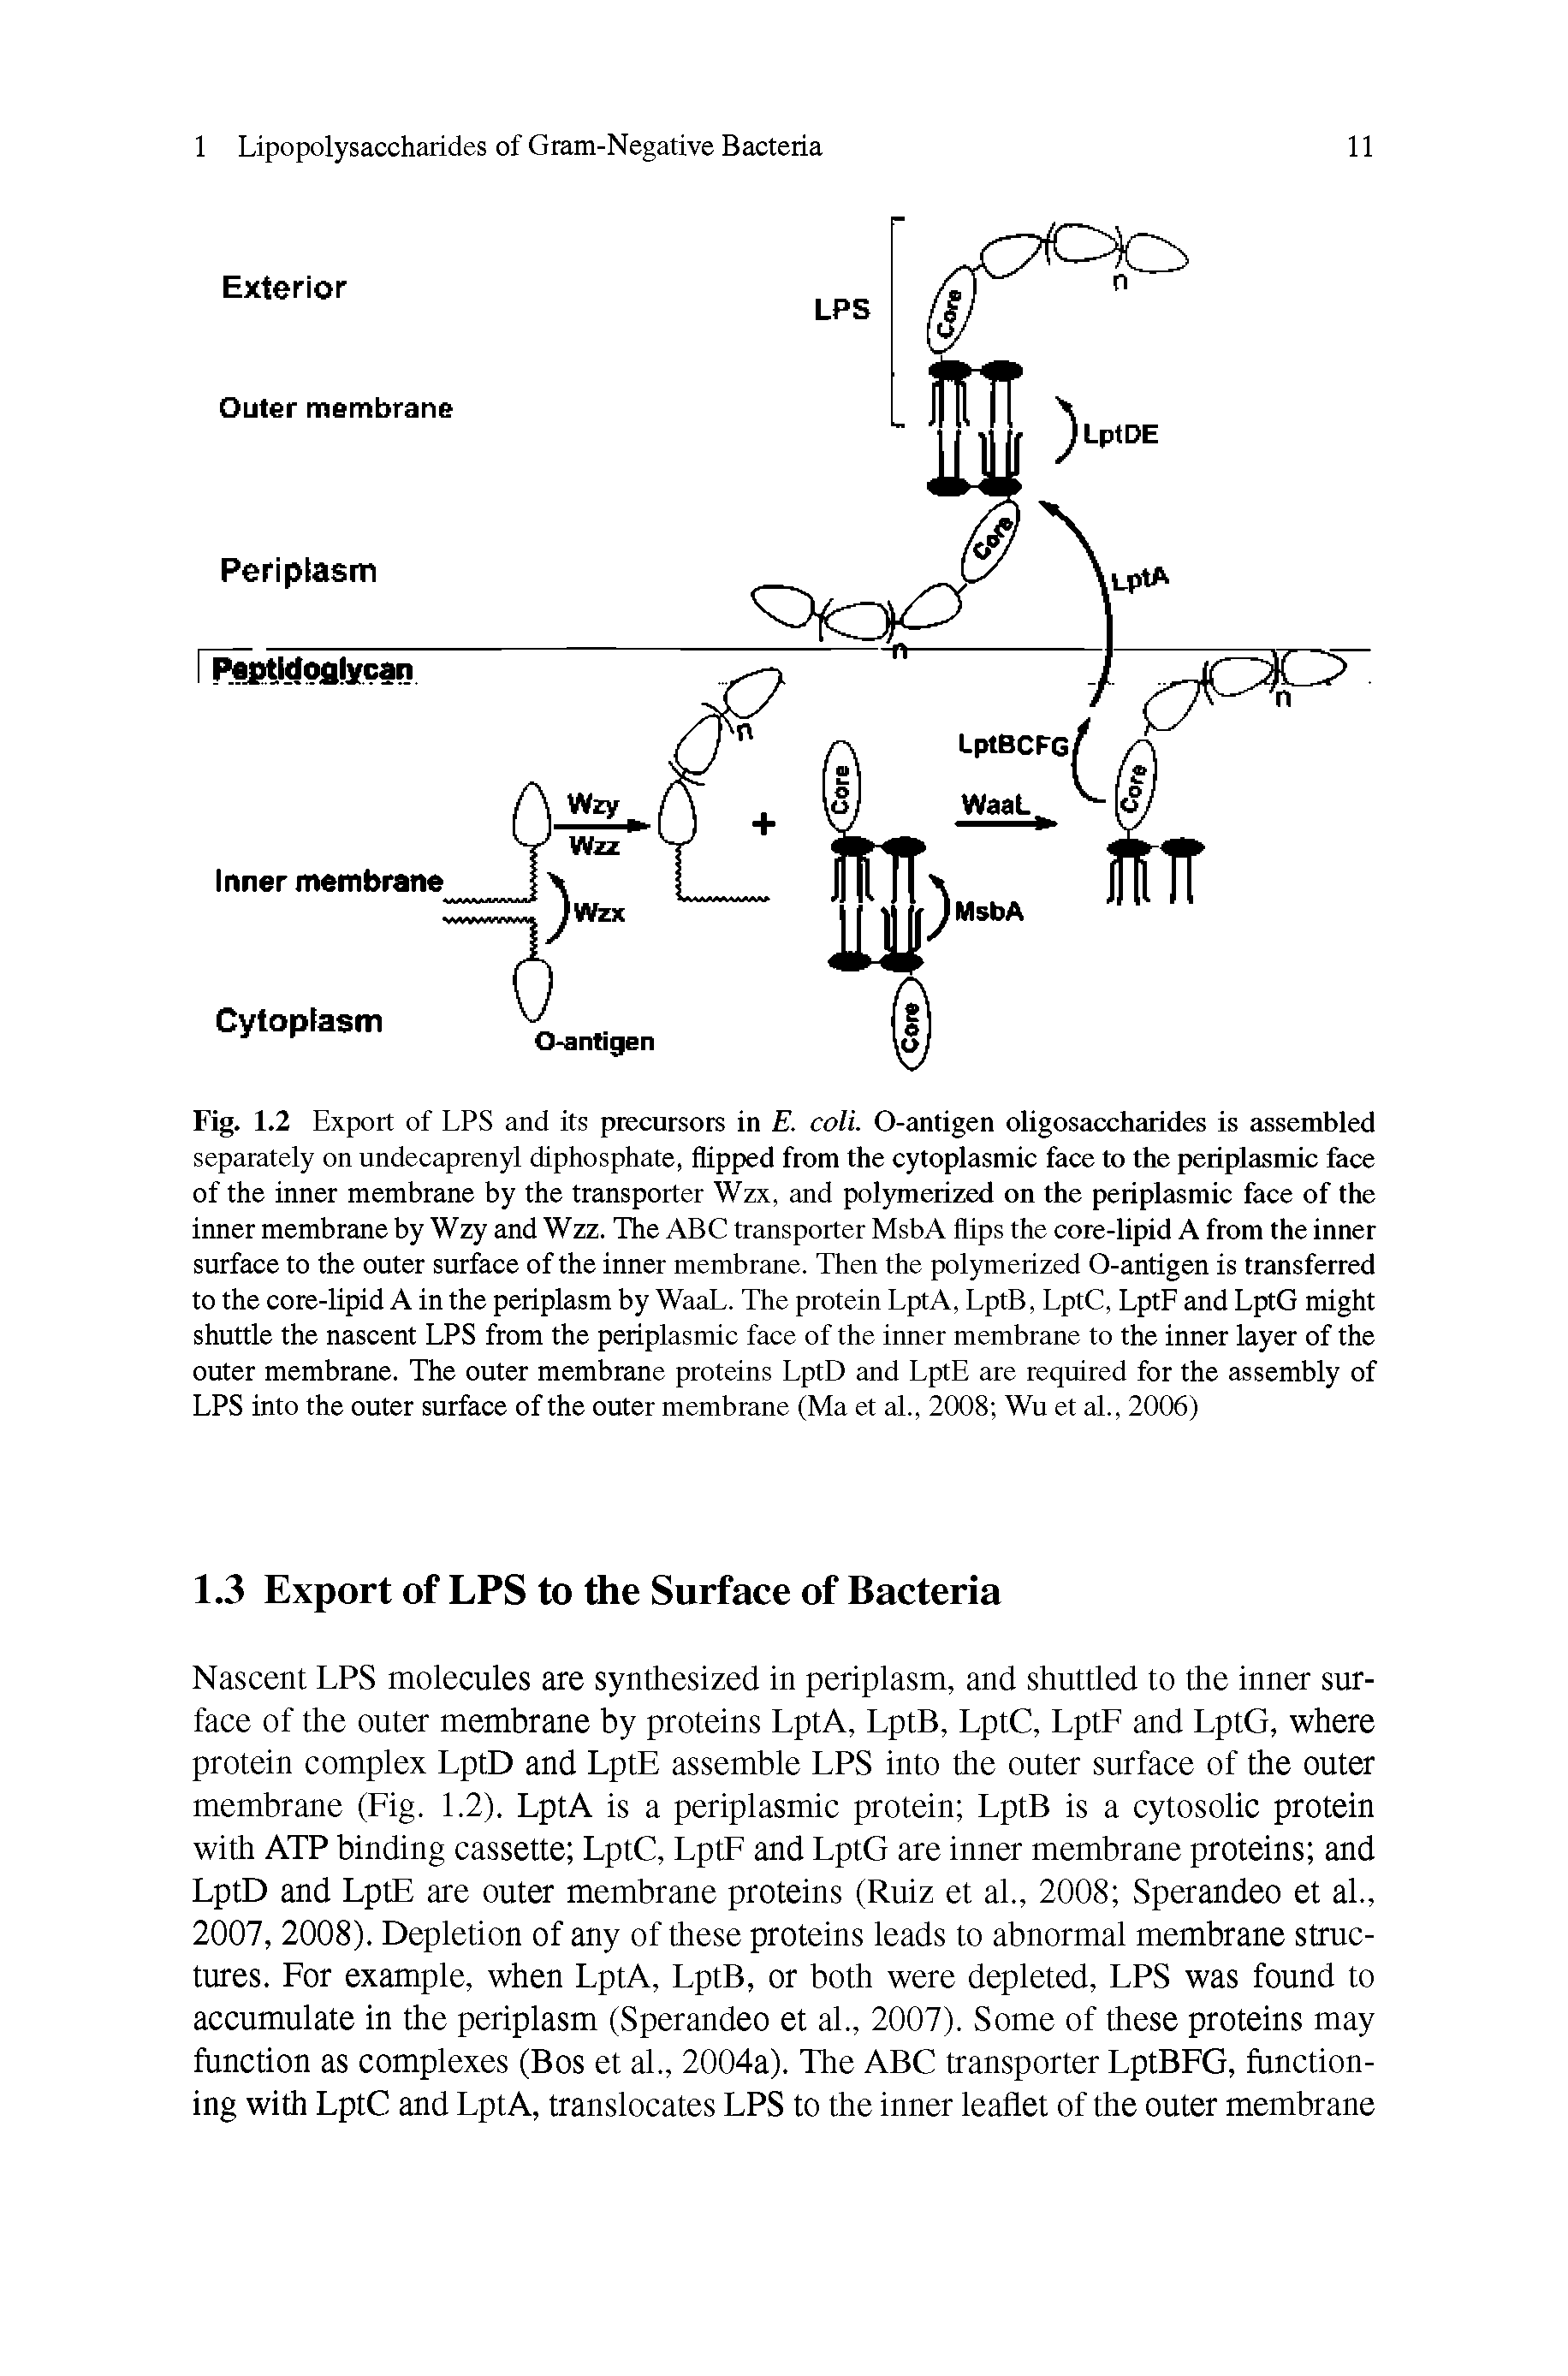 Fig. 1.2 Export of LPS and its precursors in E. coli. O-antigen oligosaccharides is assembled separately on undecaprenyl diphosphate, flipped from the cytoplasmic face to the periplasmic face of the inner membrane by the transporter Wzx, and polymerized on the periplasmic face of the inner membrane by Wzy and Wzz. The ABC transporter MsbA flips the core-lipid A from the inner surface to the outer surface of the inner membrane. Then the polymerized O-antigen is transferred to the core-lipid A in the periplasm by WaaL. The protein LptA, LptB, LptC, LptF and LptG might shuttle the nascent LPS from the periplasmic face of the inner membrane to the inner layer of the outer membrane. The outer membrane proteins LptD and LptE are required for the assembly of LPS into the outer surface of the outer membrane (Ma et al., 2008 Wu et al., 2006)...